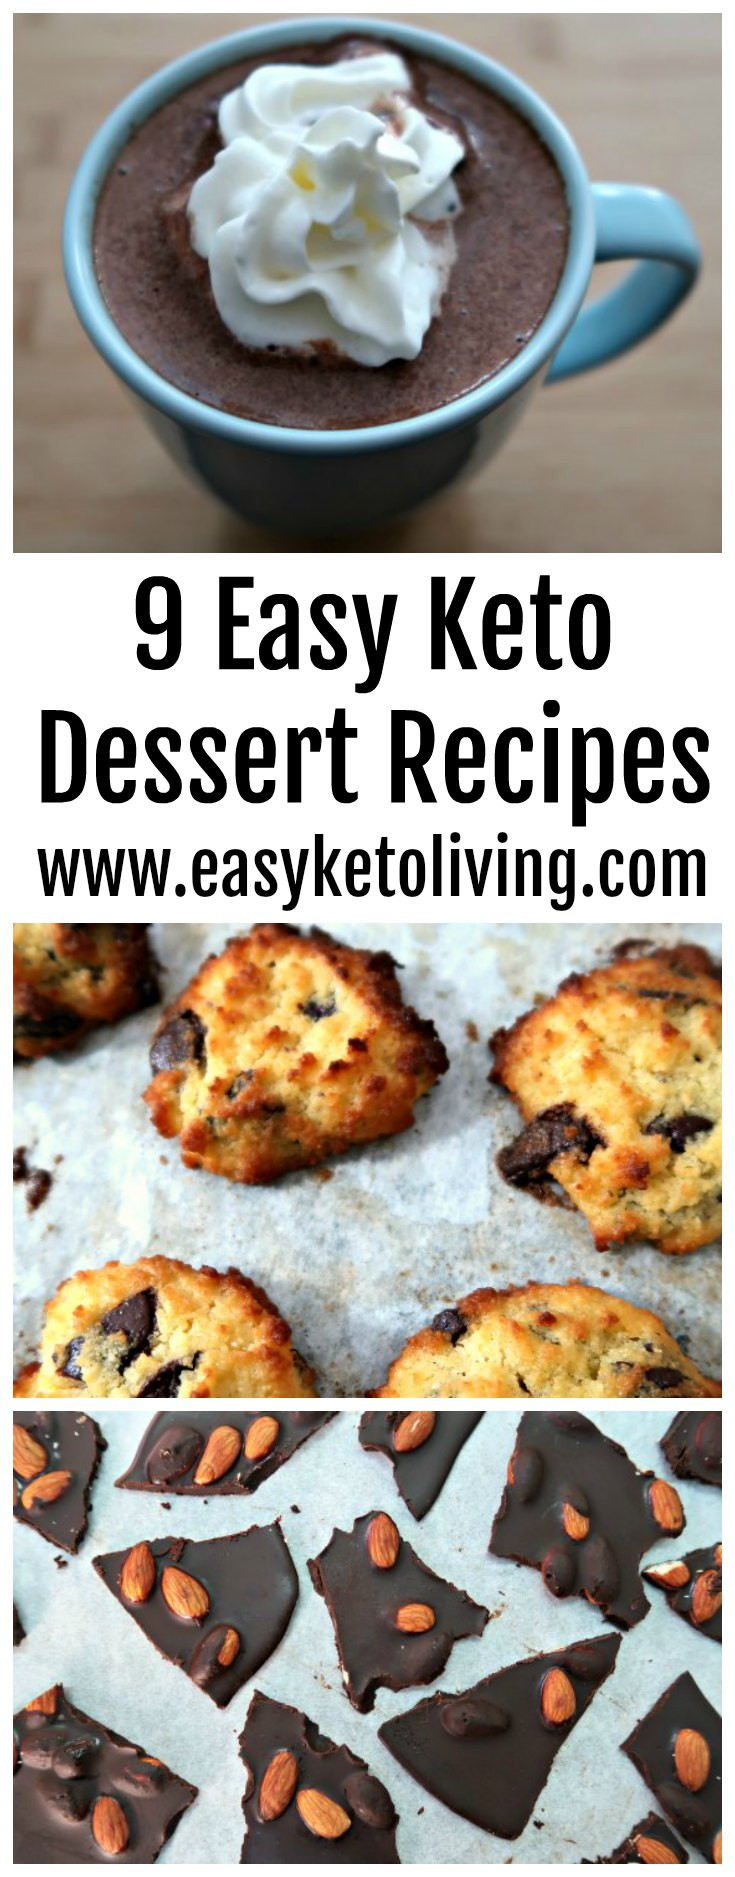 Low Carb Diet Desserts
 9 Easy Keto Dessert Recipes Quick Low Carb Ketogenic